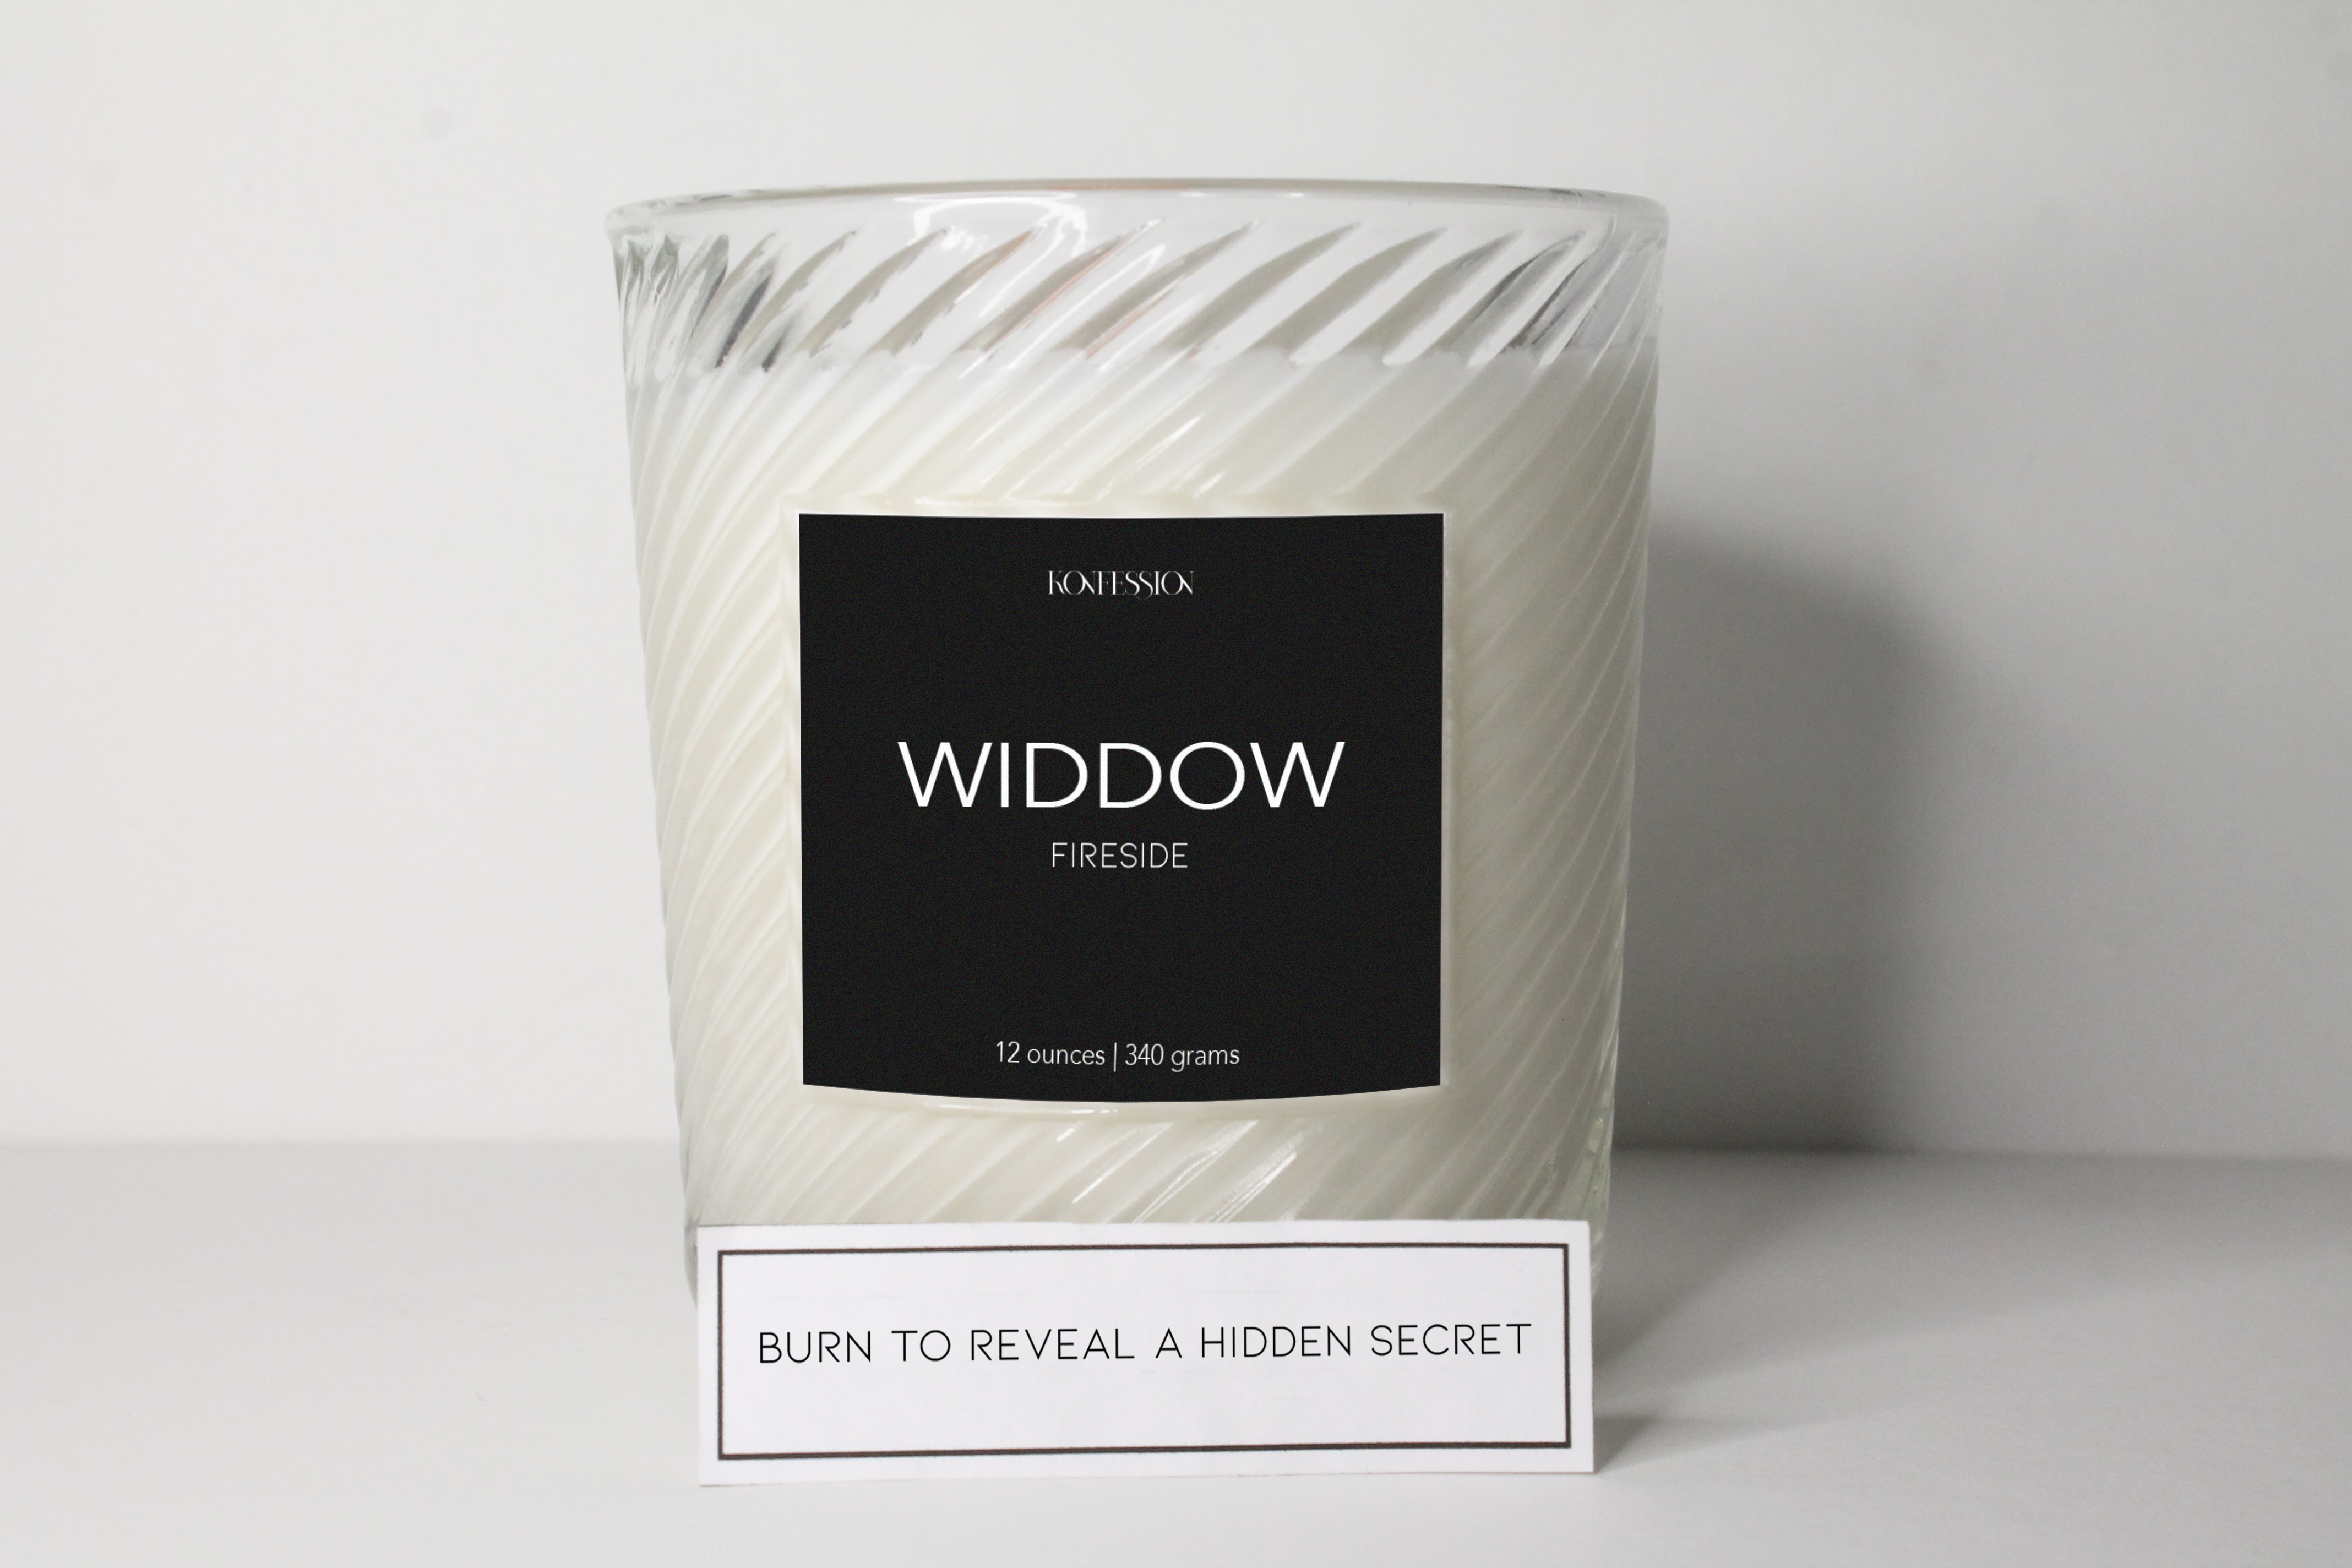 All of our soy candles come with a hidden confession hidden inside sent in by strangers from around the world. Burn to reveal a hidden secret. 